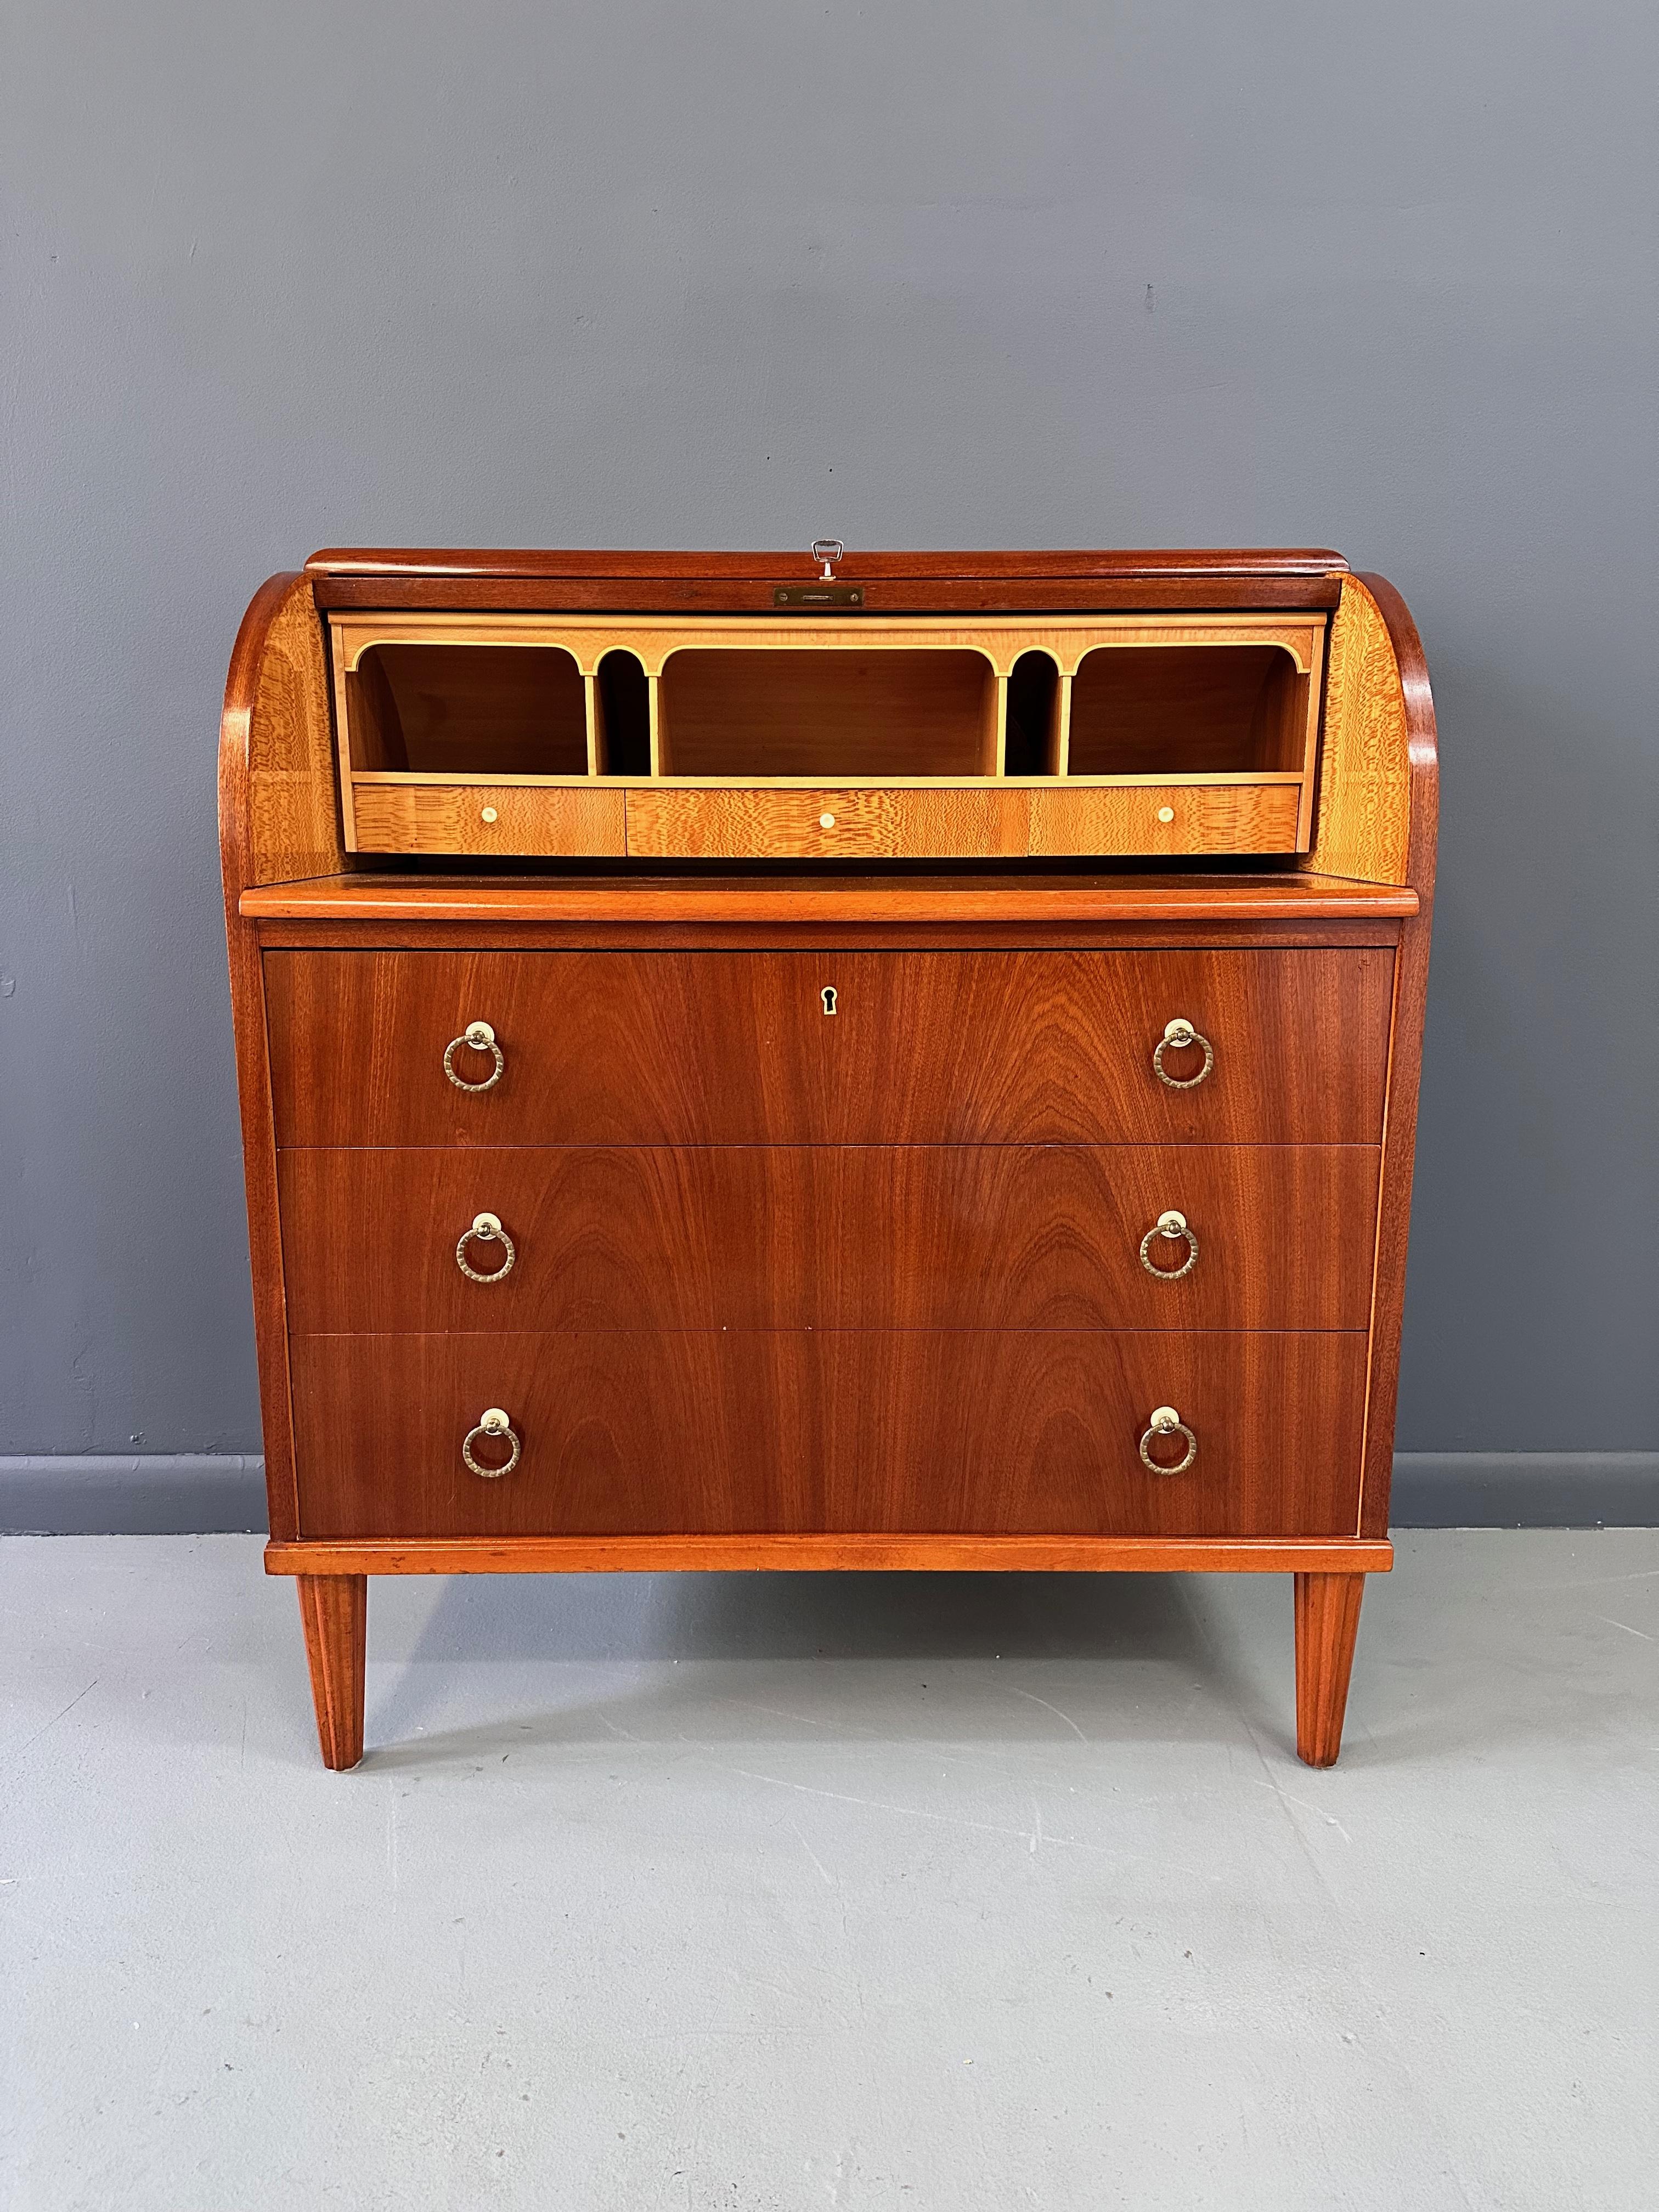 Walnut Early Danish Roll Top Desk with Fluted Legs in Booked Matched Veneer Mid Century For Sale